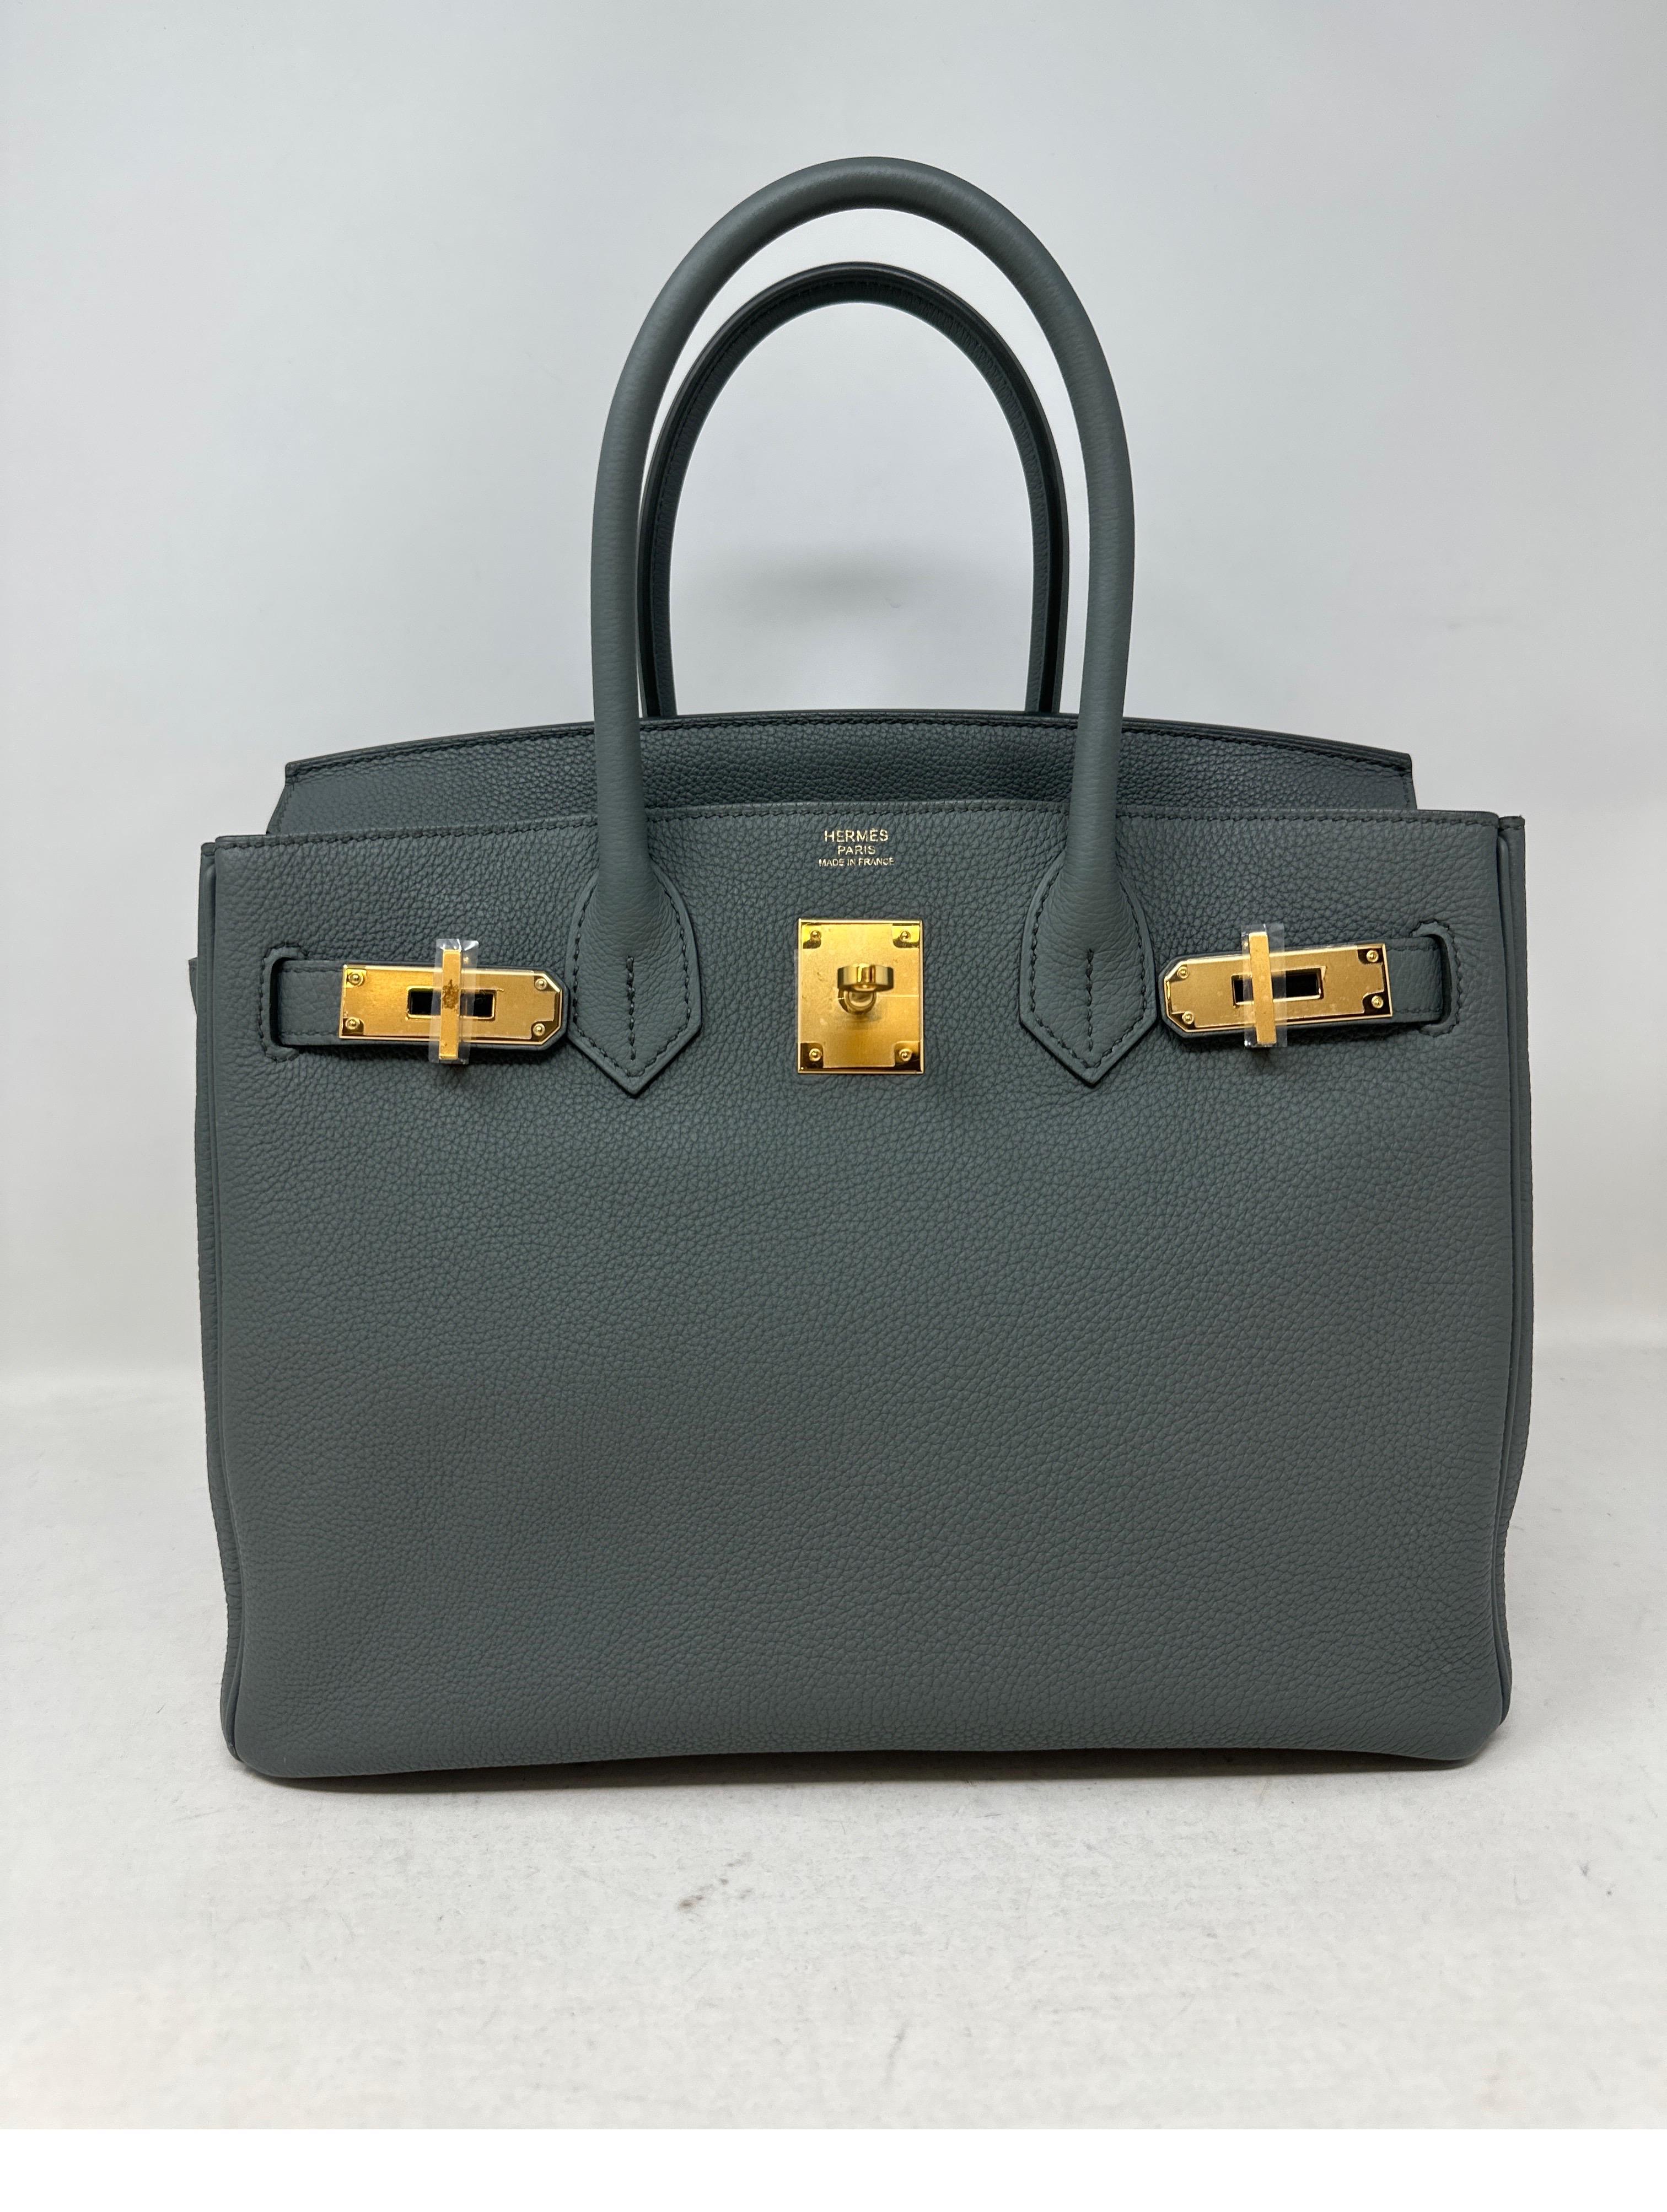 Hermes Vert Amande Birkin 30 Bag. Gorgeous light grey green color. Rare soft color. Gold hardware. Excellent like new condition. Most wanted size. Includes clochette, lock, keys, and dust bag. Add this to your collection. Great investment piece.